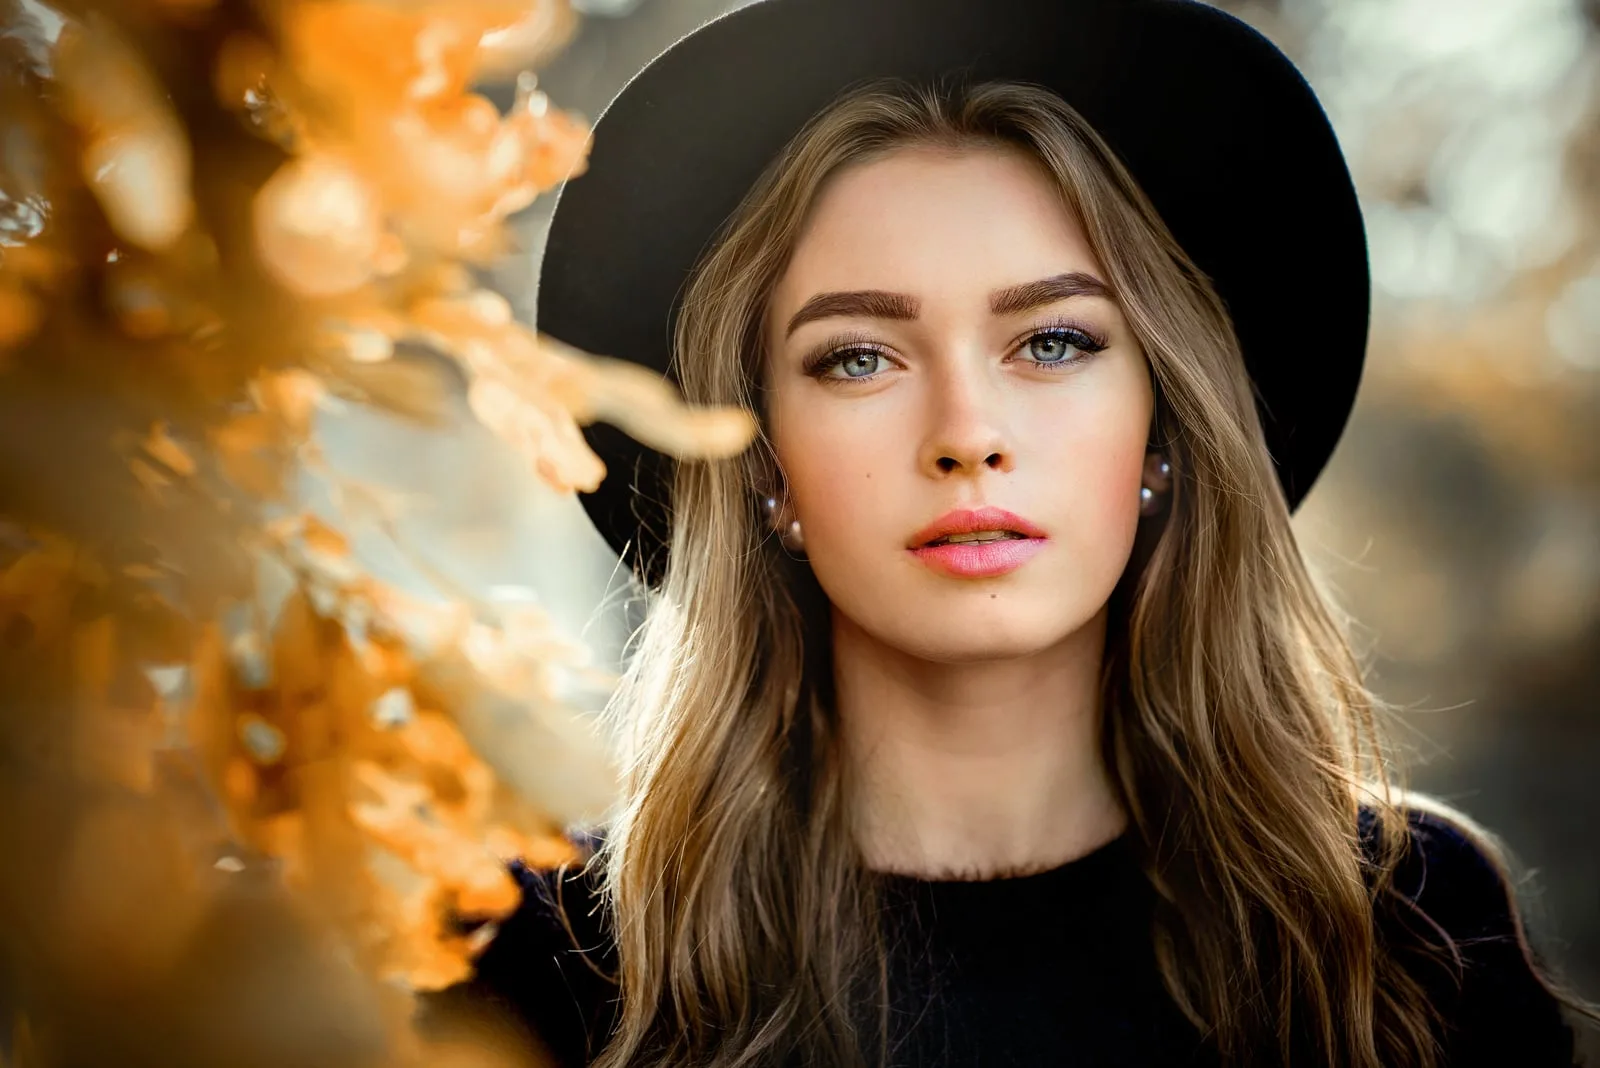 portrait of a Beautiful girl in a dark dress and black hat standing near colorful autumn leaves